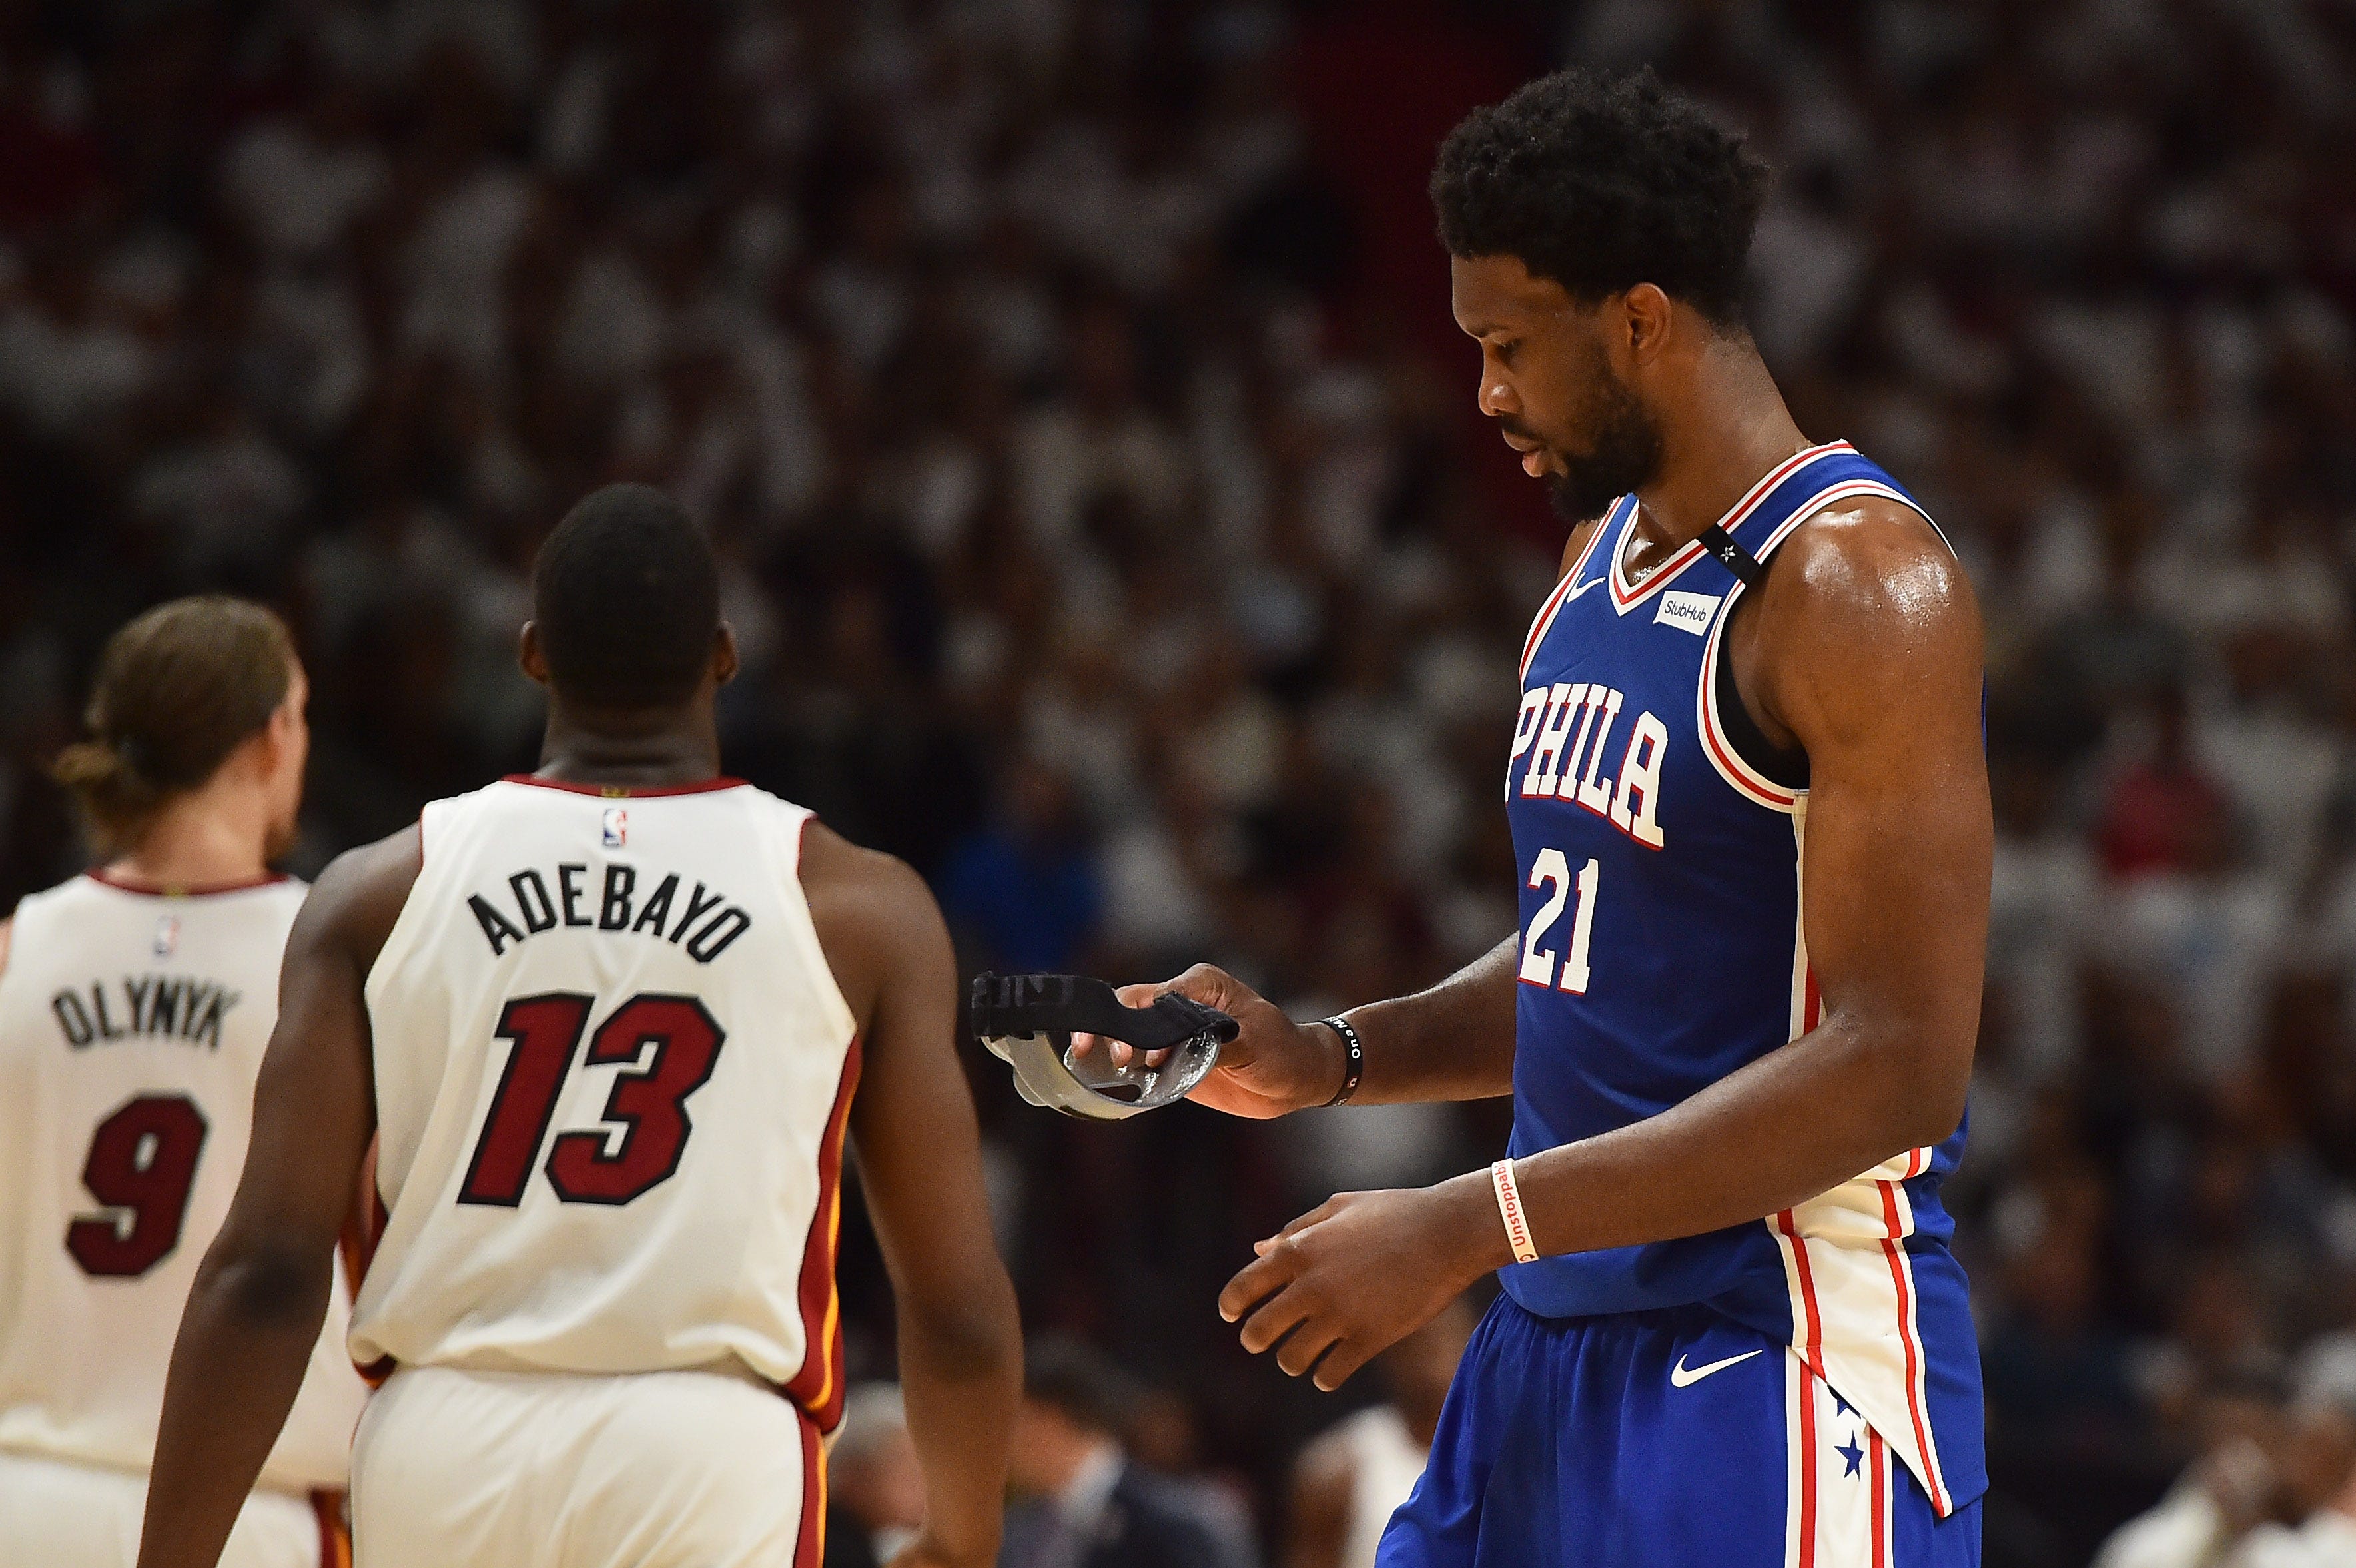 Why Justise Winslow did not get a technical foul for stepping on Joel Embiid's mask